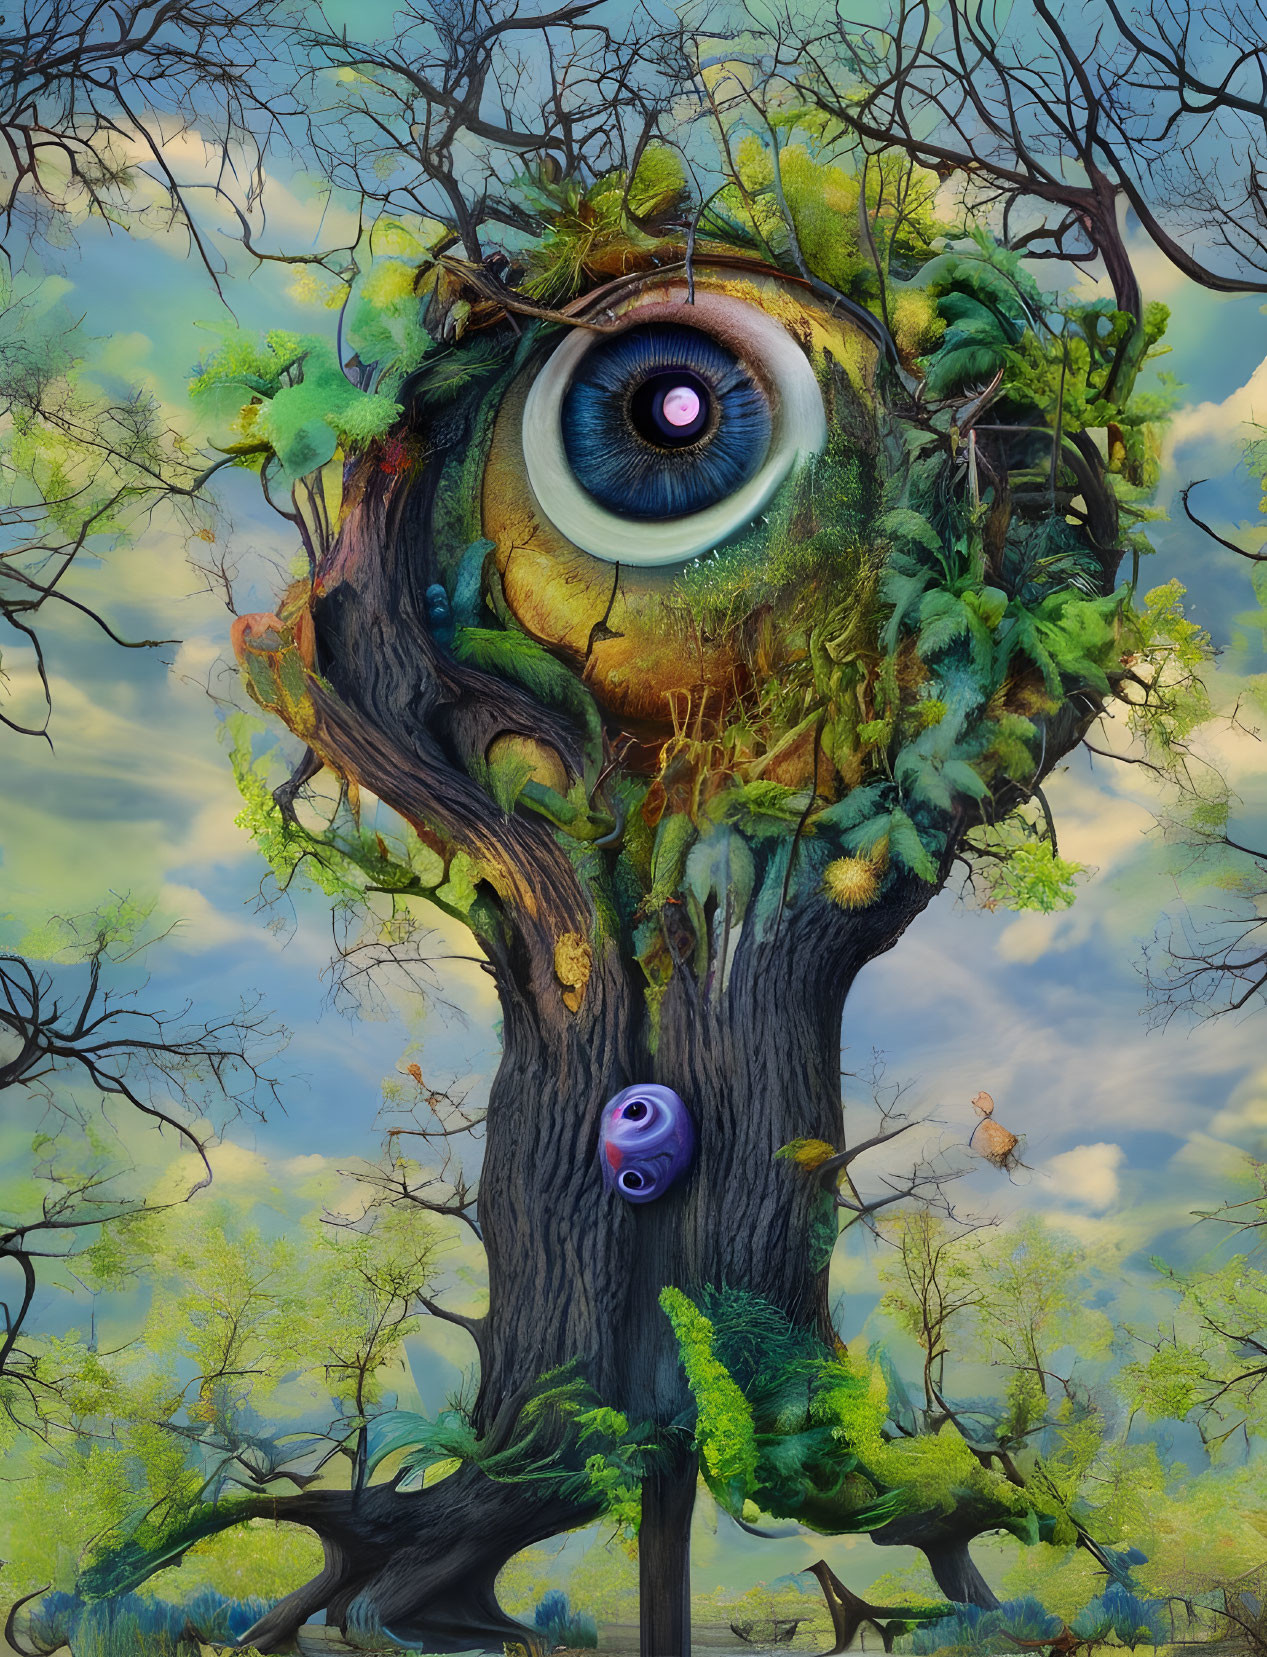 Detailed Eye in Vibrant Tree Scene with Wildlife and Cloudy Sky